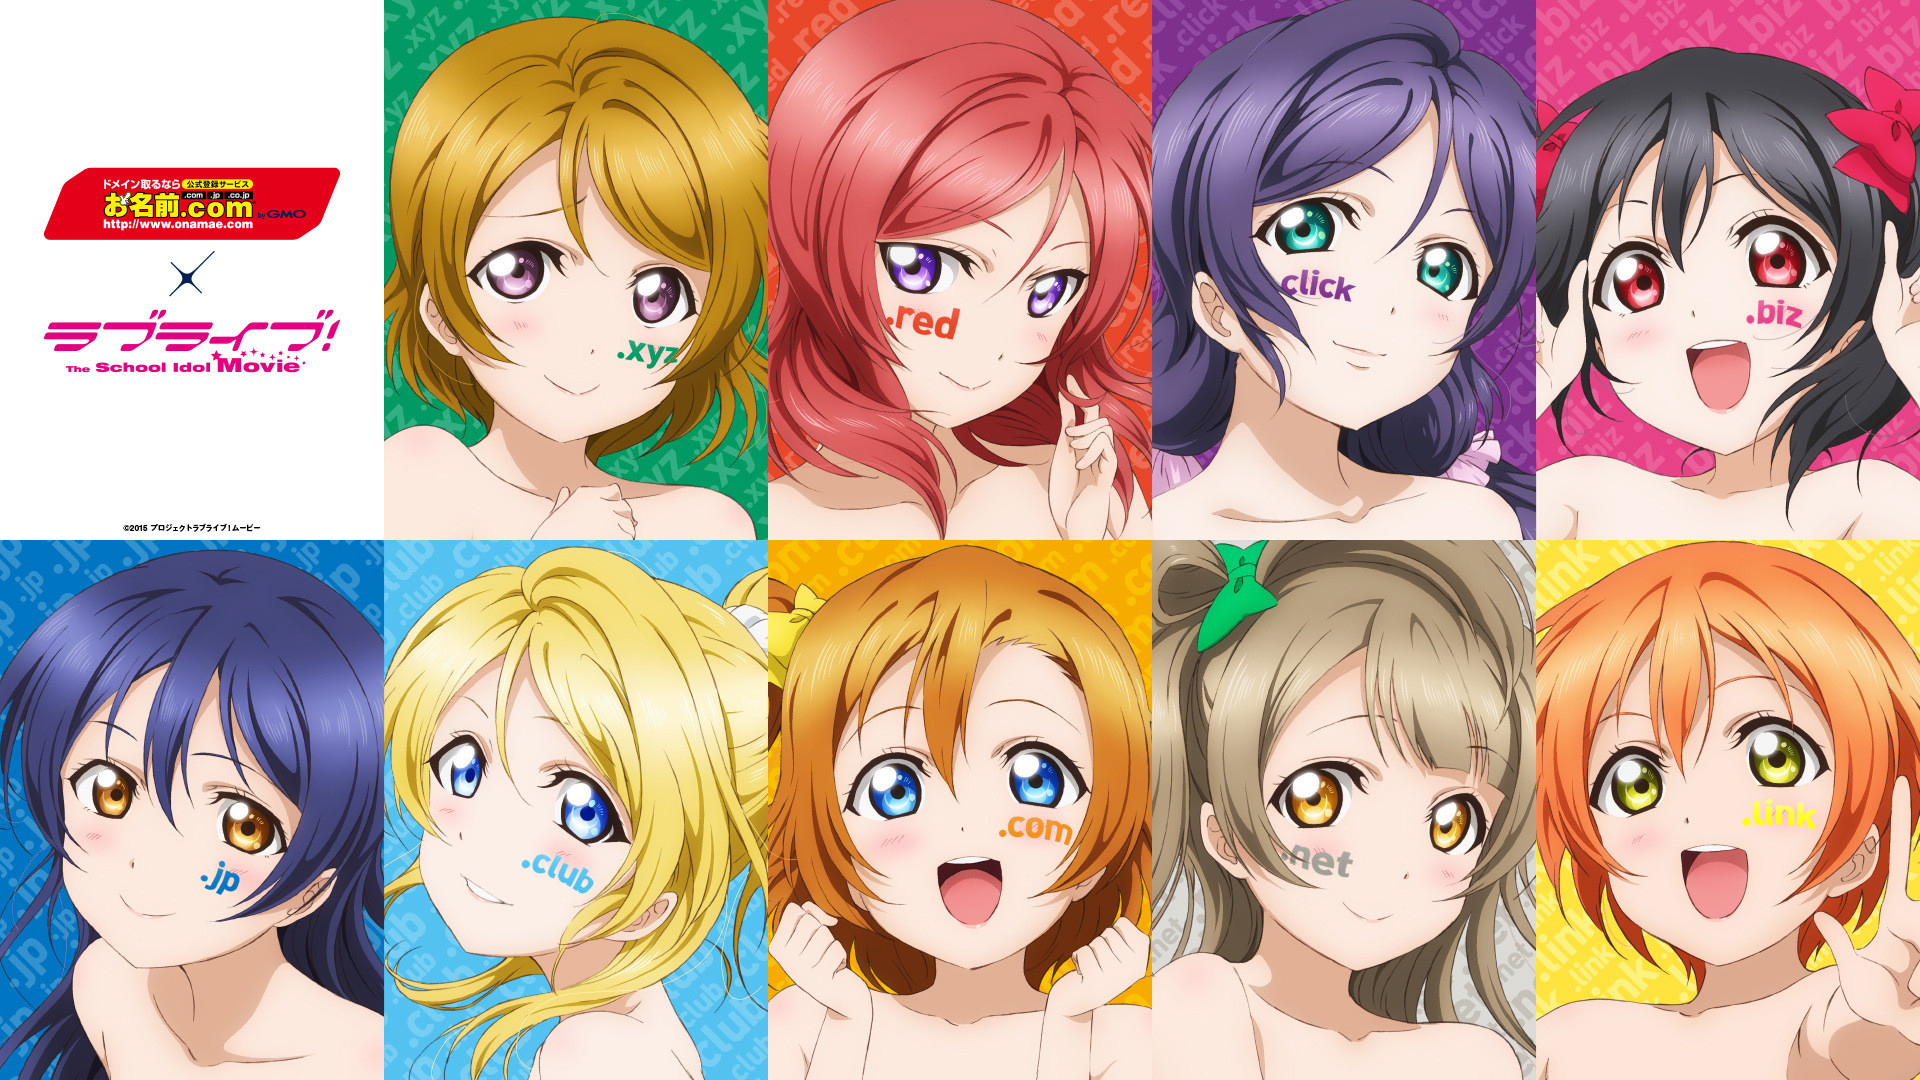 Latest Love Live School Idol Project Wallpaper about life